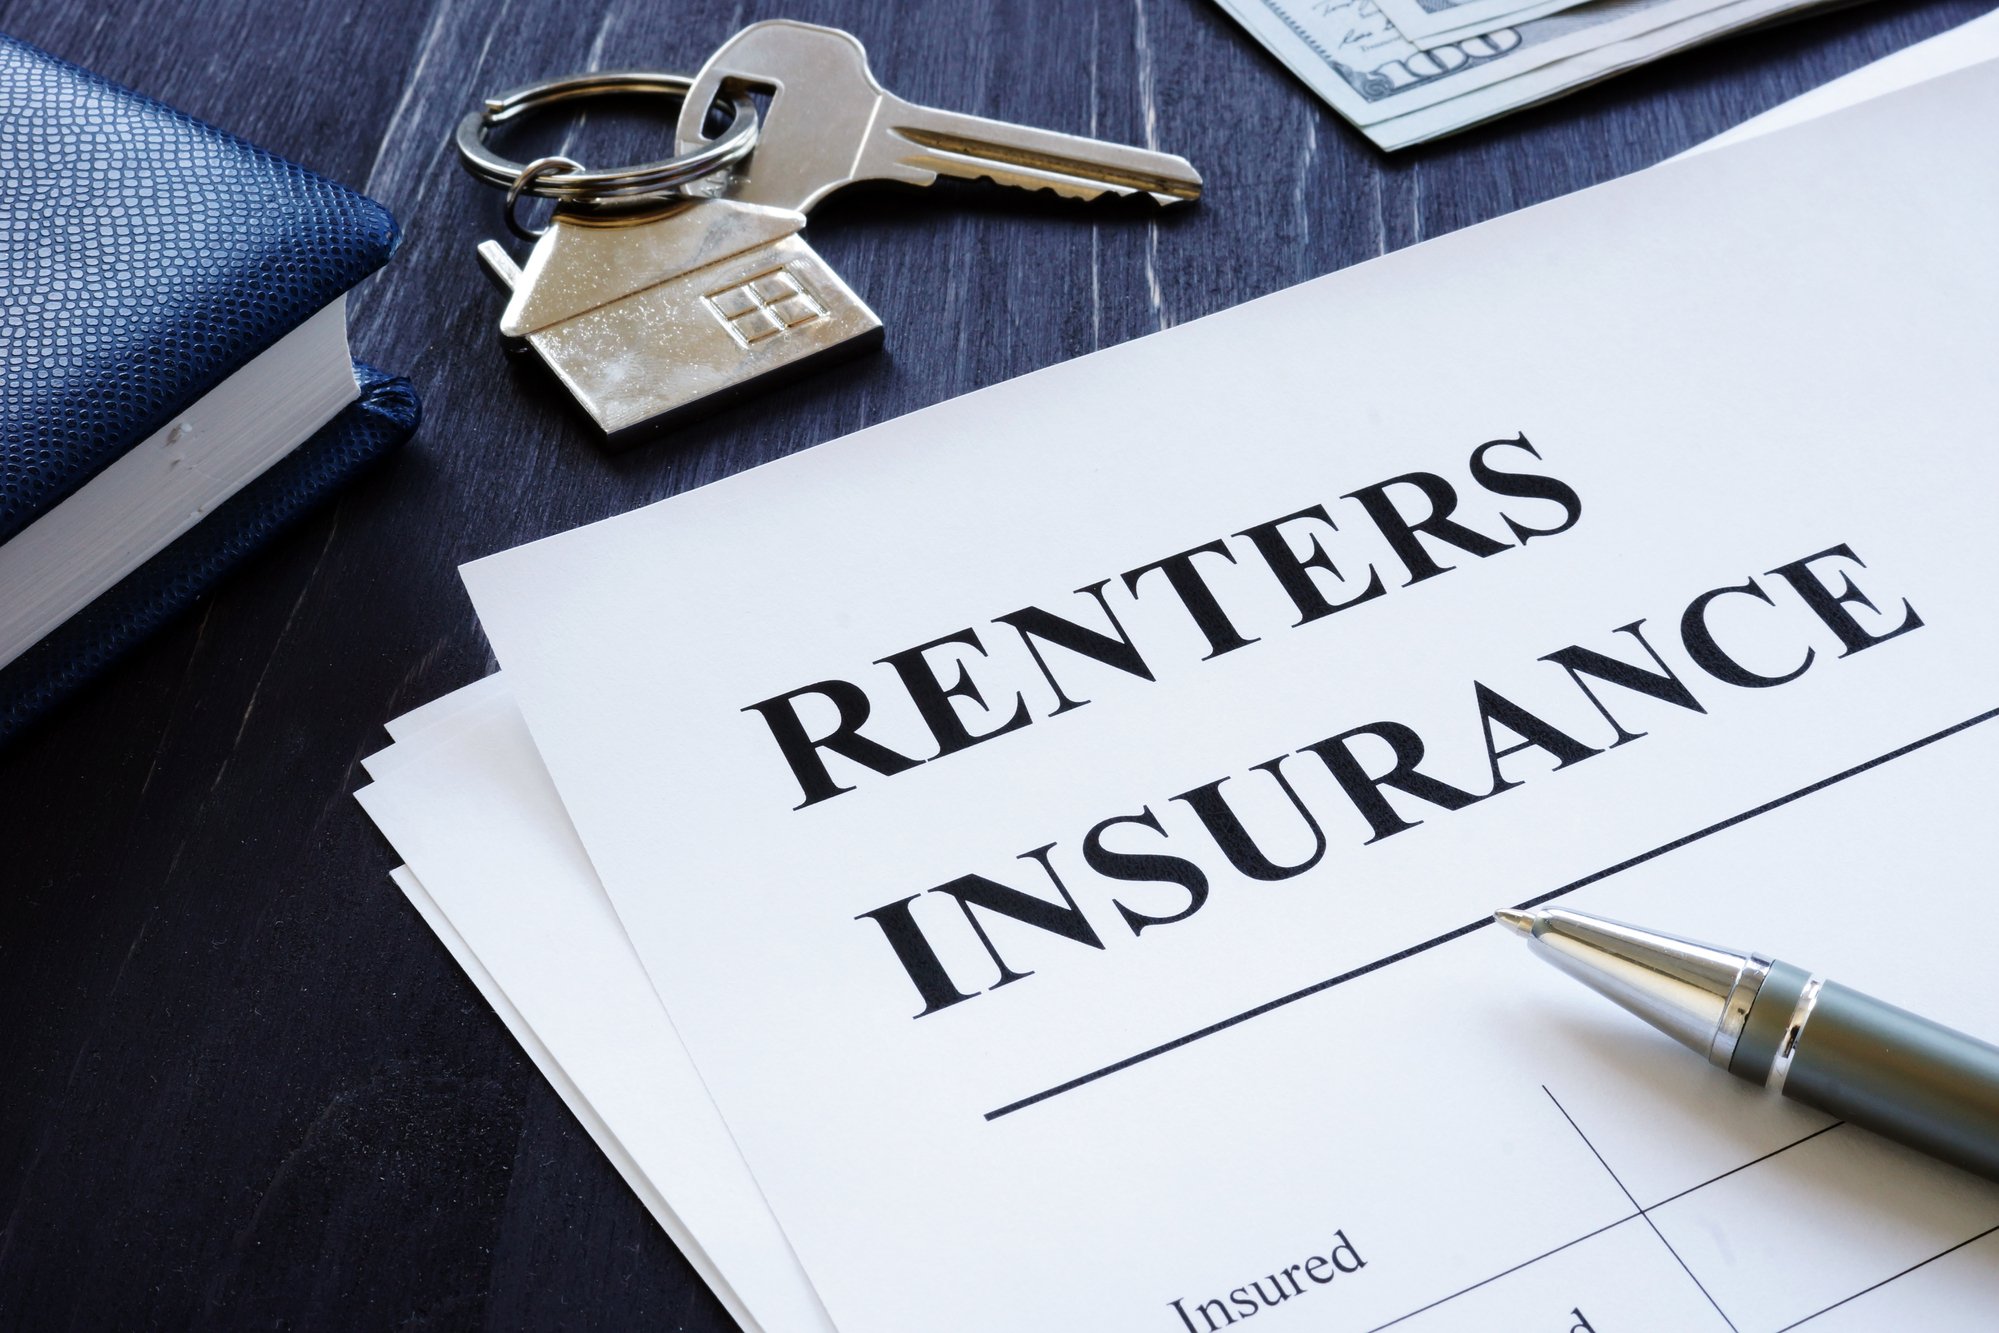 Renters Insurance policy agreement and key from apartments